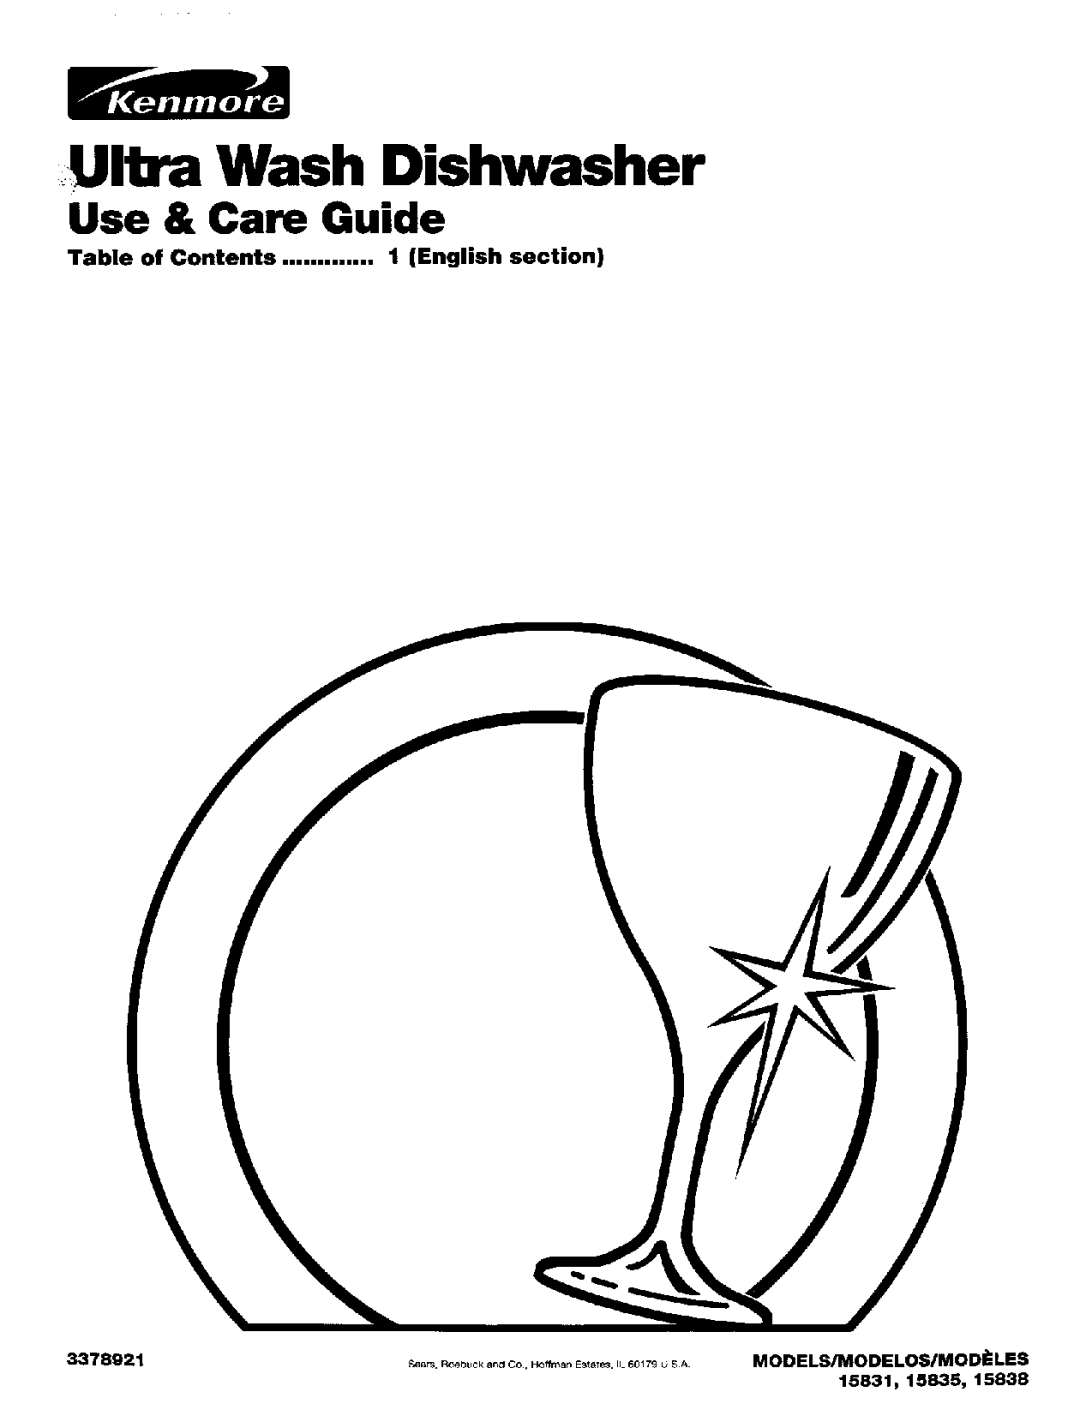 Kenmore 15831, 15835, 15838 manual Ultra Wash Dishwasher, Table of Contents English Section 